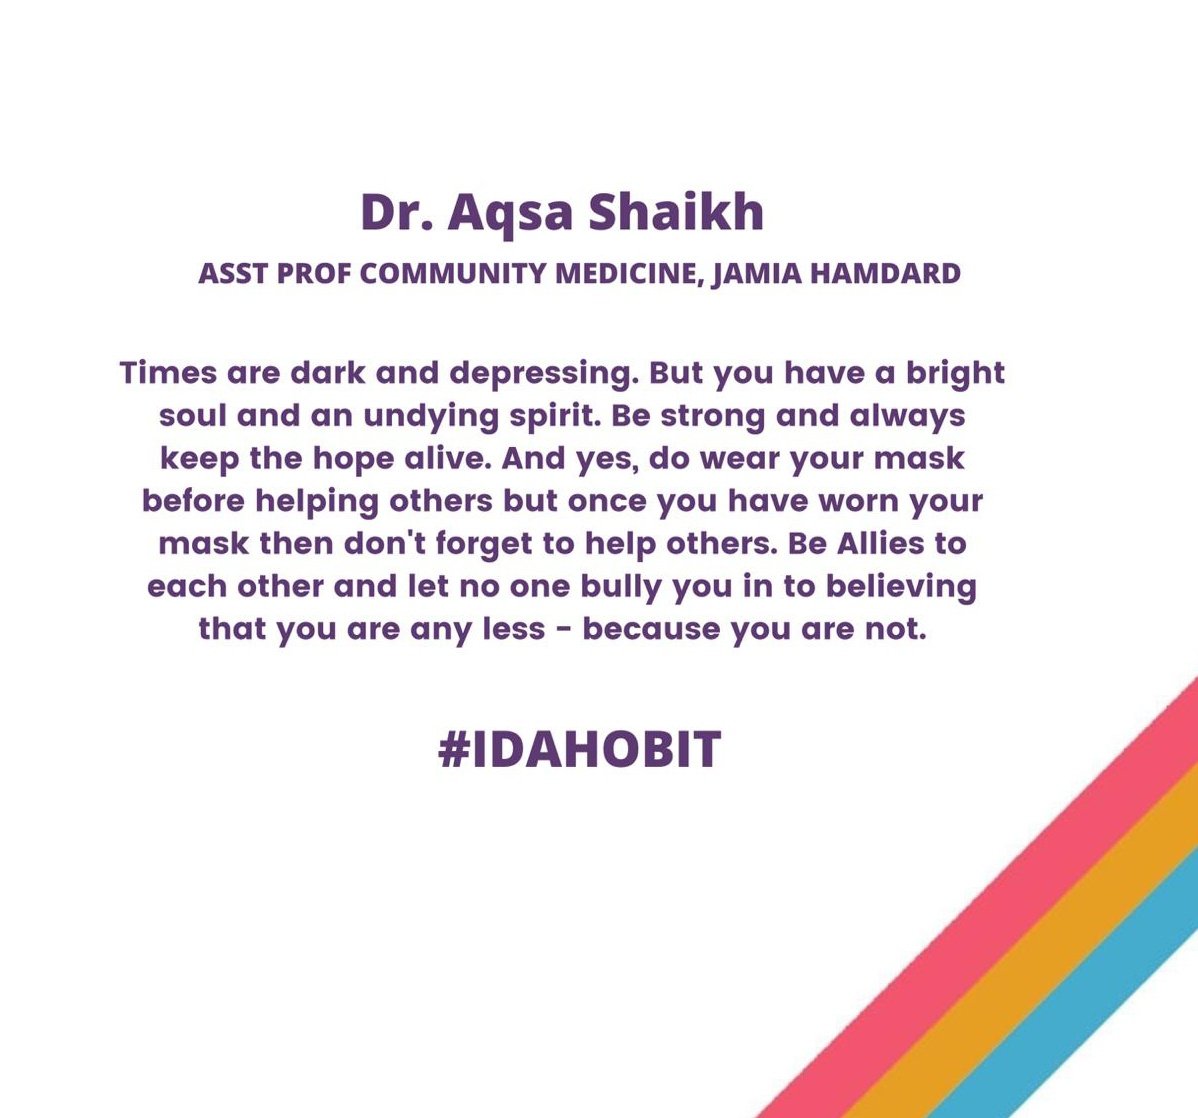 We may be different, but we are no less
#IDAHOBIT2020